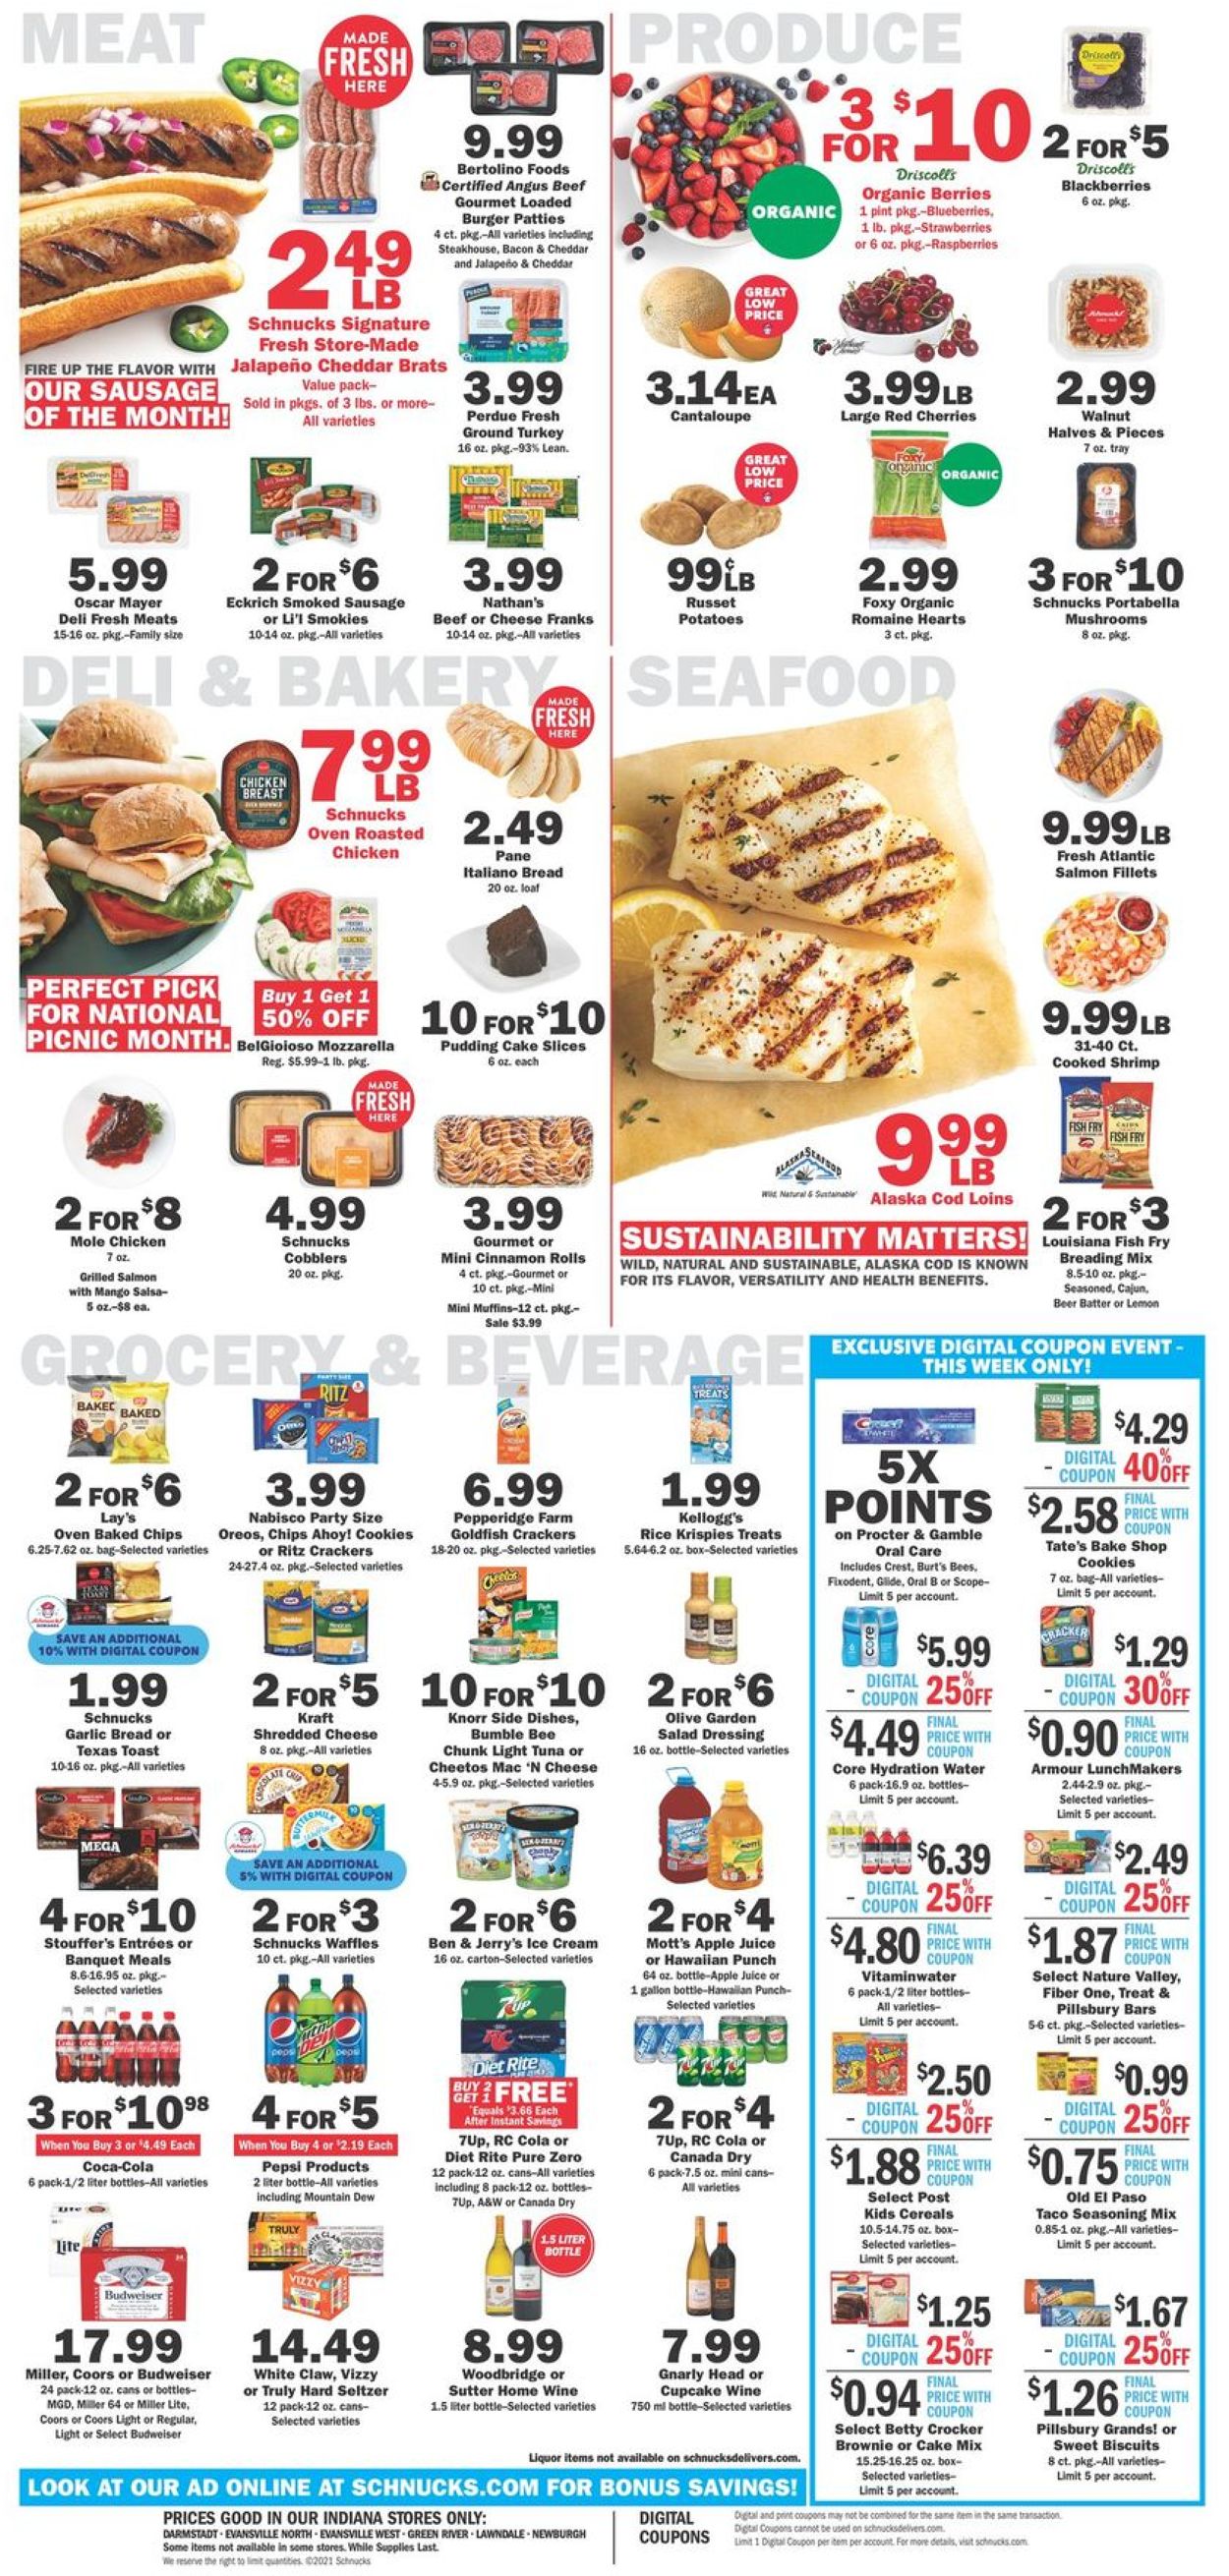 Schnucks Current weekly ad 07/14 - 07/20/2021 [4] - frequent-ads.com